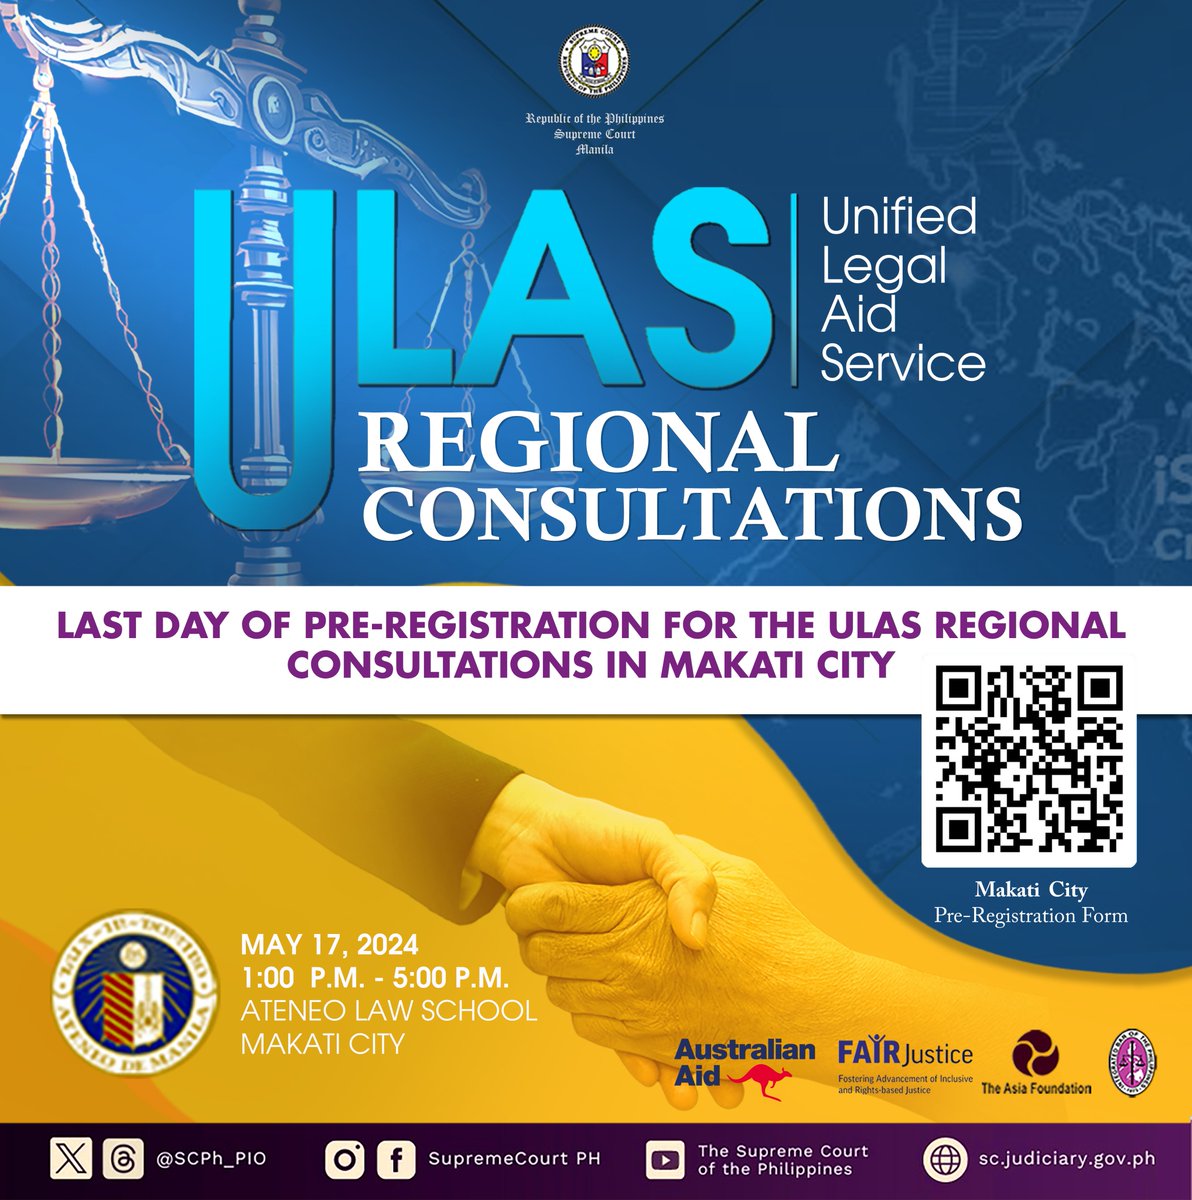 LAST CALL FOR PARTICIPANTS FOR THE MAKATI LEG | Be heard before the ULAS Rules are finalized. Pre-registration for the ULAS Regional Consultations in Makati City is open until today. Scan the QR code or click the following link: tinyurl.com/26rkch4y. #ULASRegionalConsultations